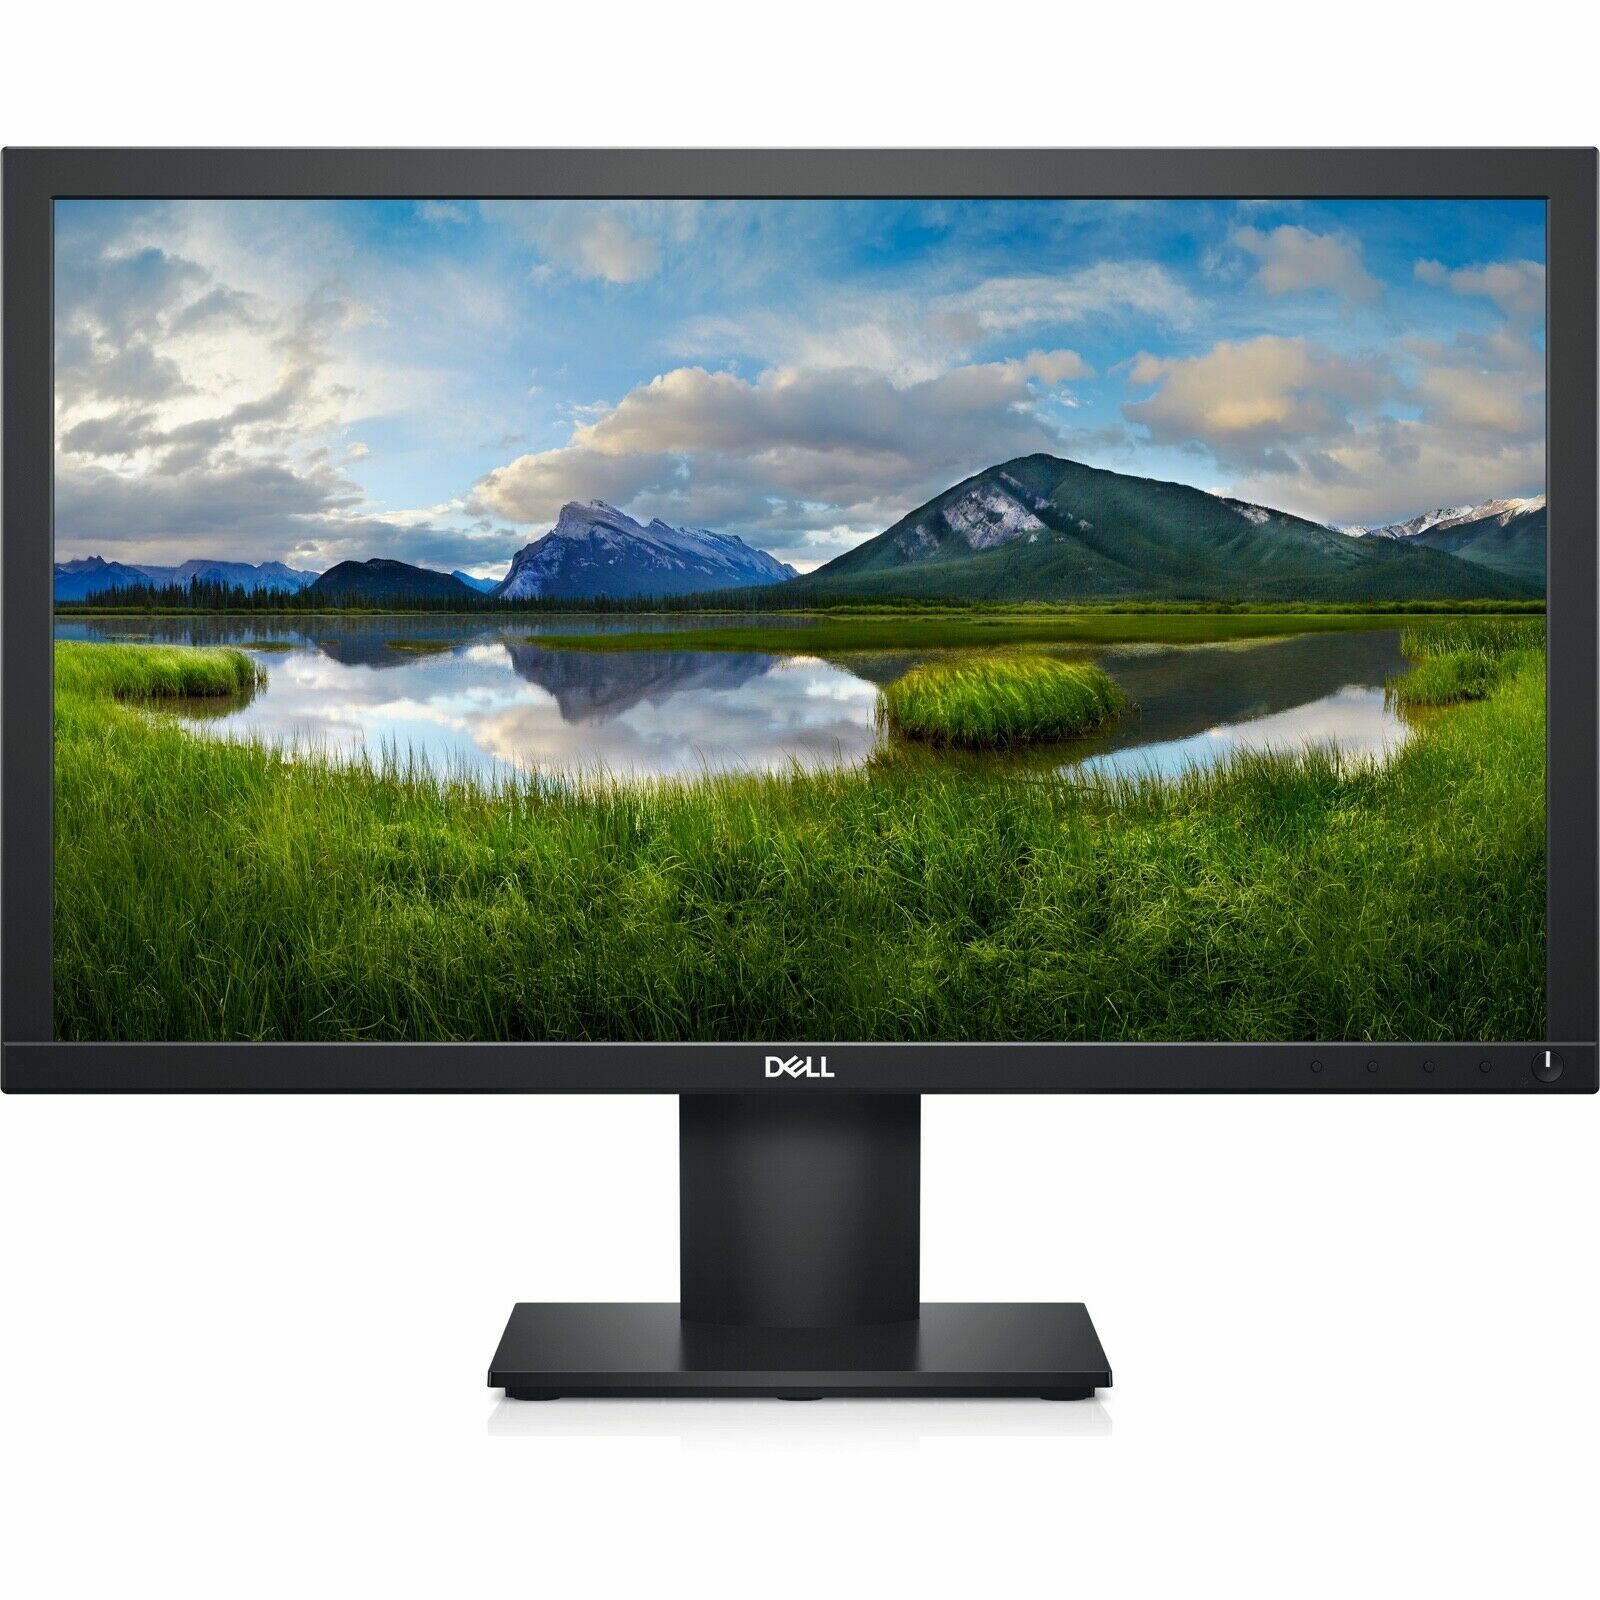 Dell UltraSharp 22 inch LCD HDMI Monitor with Power cable and VGA cable Grade A+